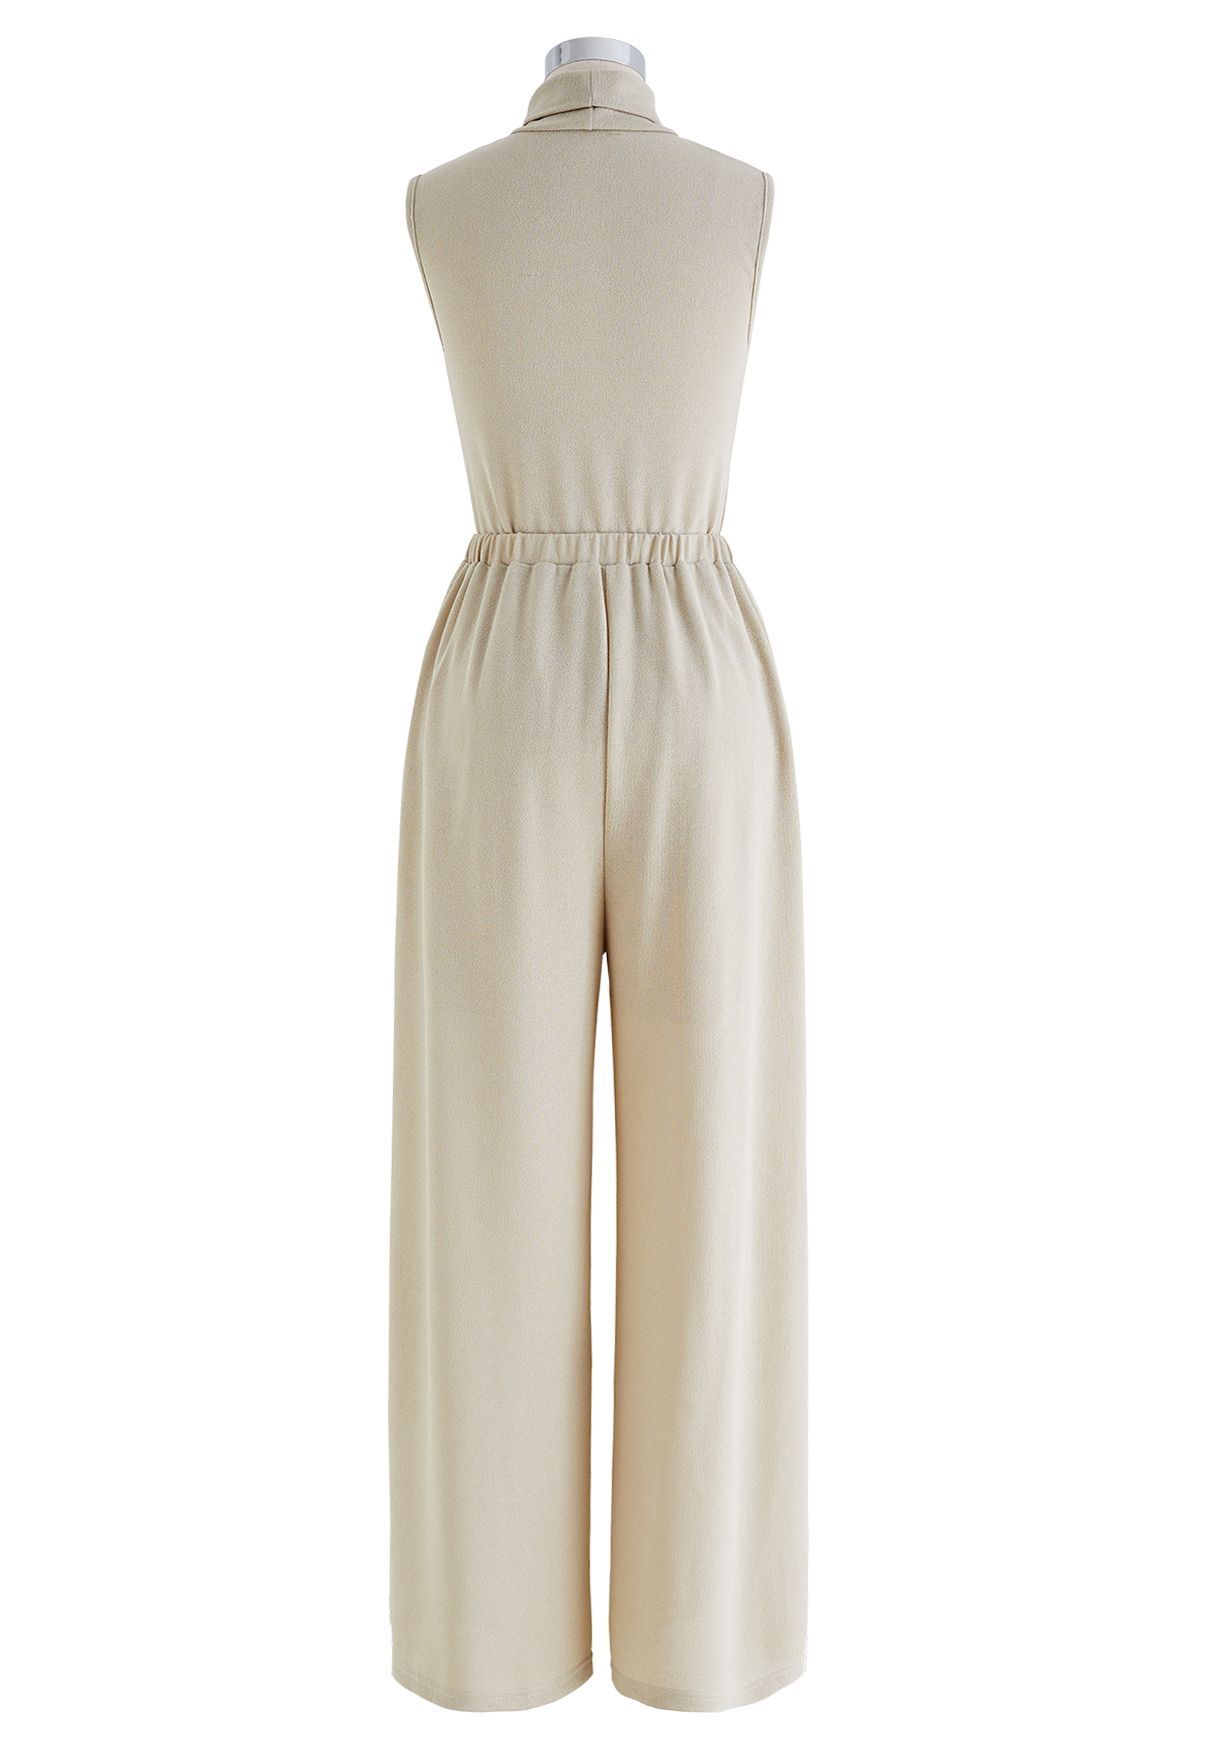 High Neck Sleeveless Top and Pants Set in Sand